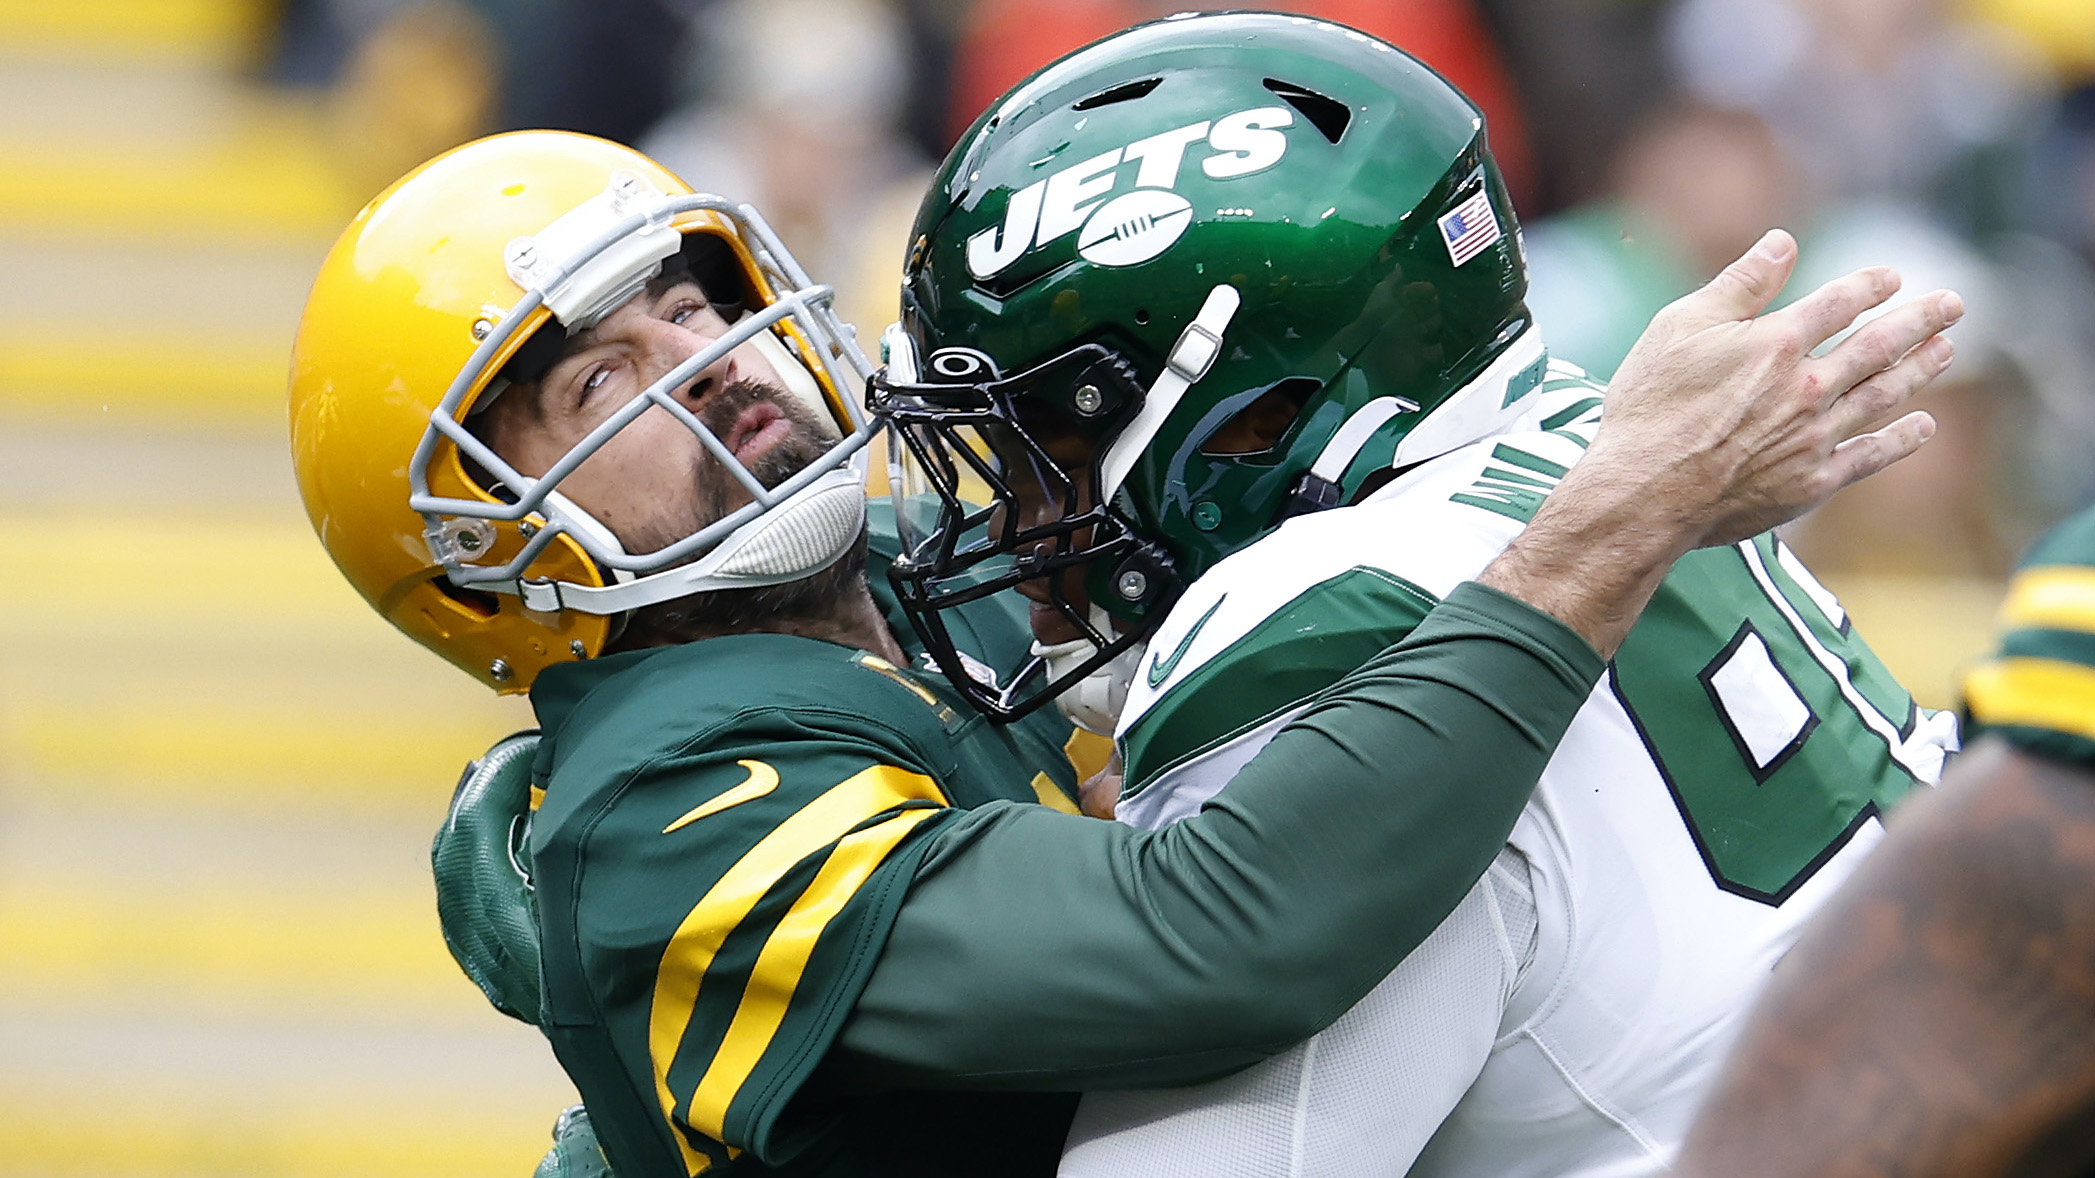 Aaron Rodgers takes a hit from a Jets defender.